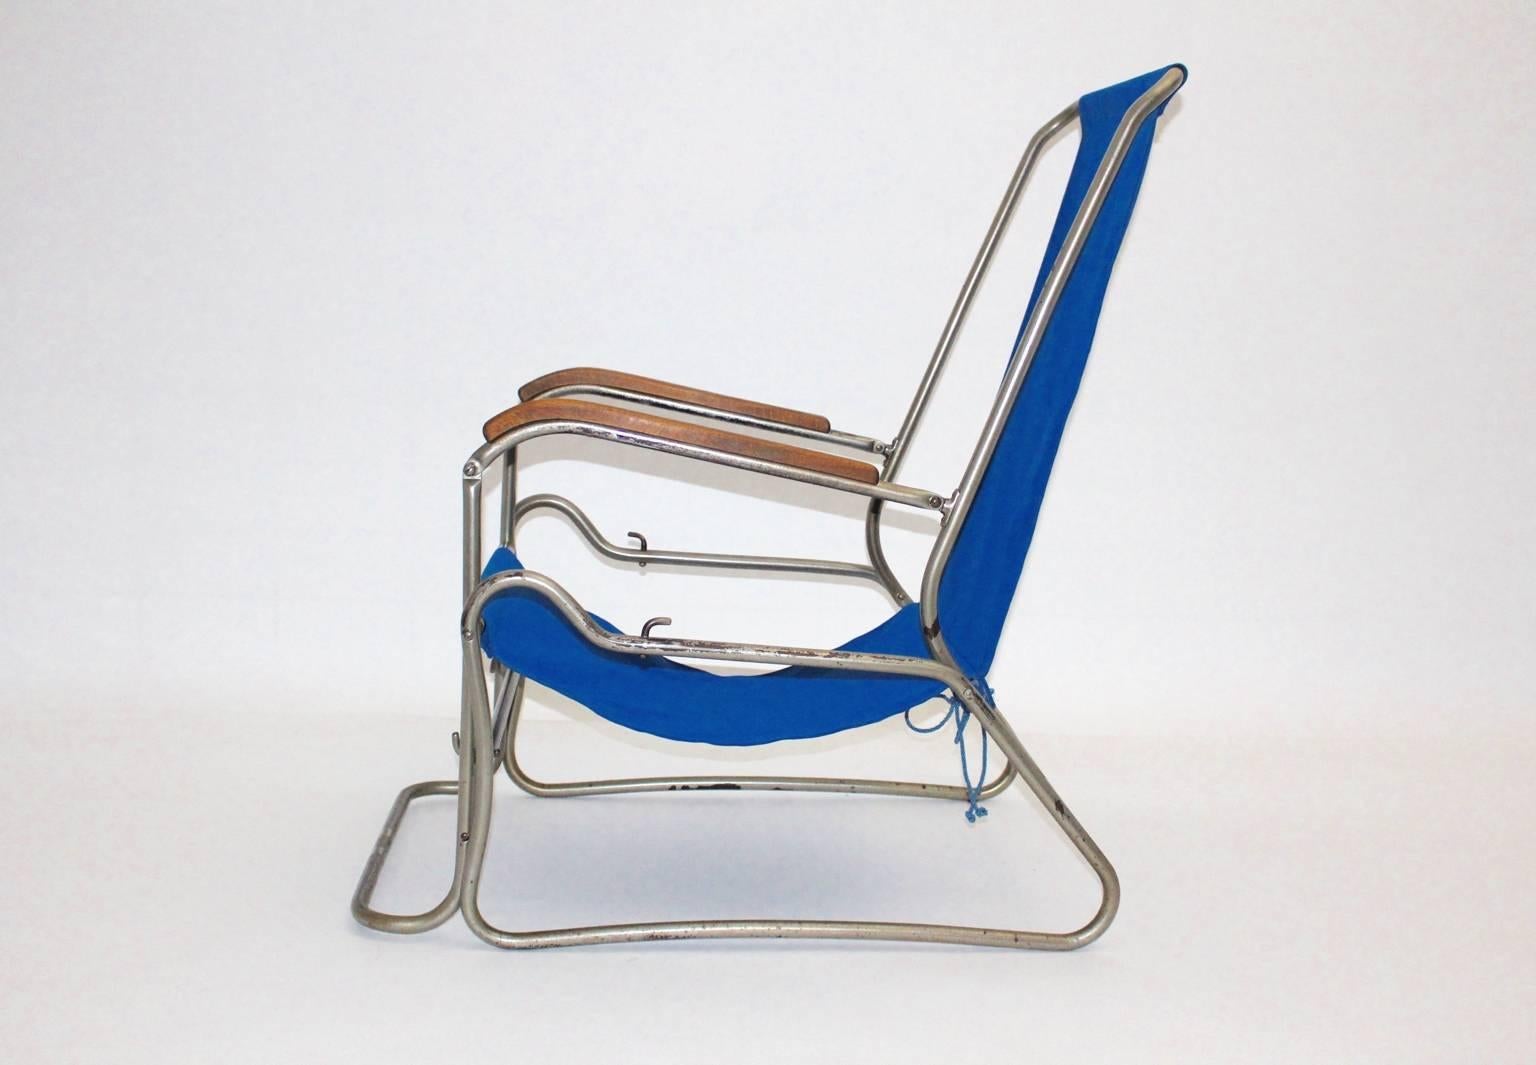 Chromed Vintage Chaise Longue Design attributed to Jean Burkhalter (1895-1984) is a great adjustable chaise longue from the Bauhaus era.
The lounge chair or armchair was made of nickel-plated tube steel and shows partly nickel rests.
The armrests